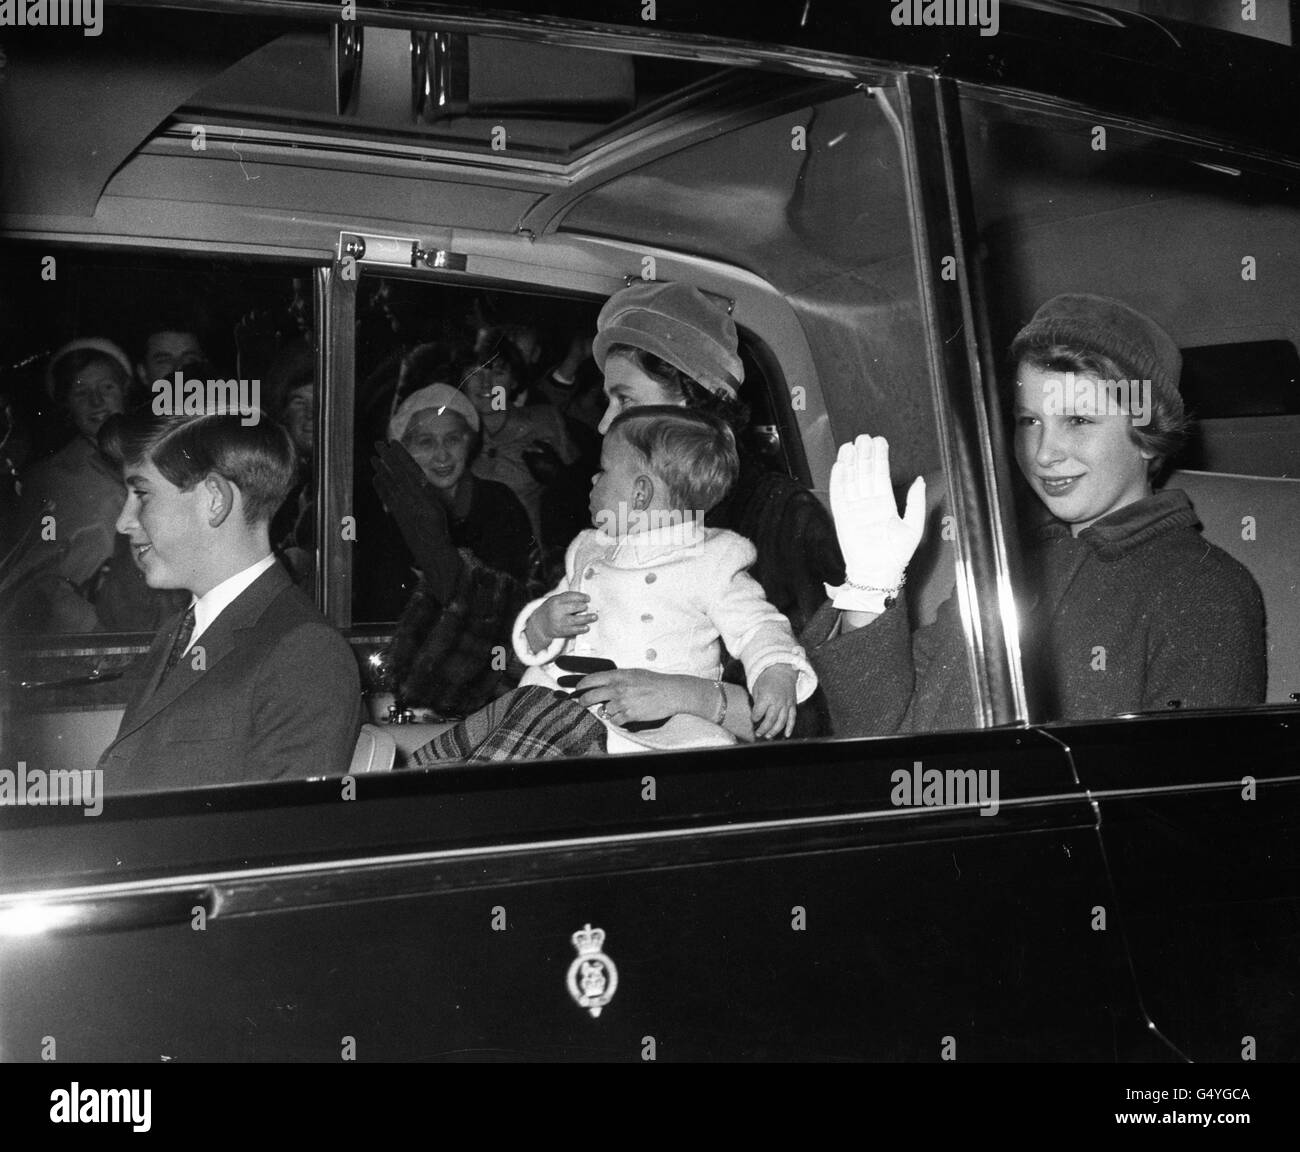 *Scanned low-res from print* Queen Elizabeth II with the Prince of Wales, Princess Anne and baby Prince Andrew driving from Buckingham Palace to Liverpool Street Station, to join other members of the Royal family at Sandringham for the Christmas holidays. Stock Photo